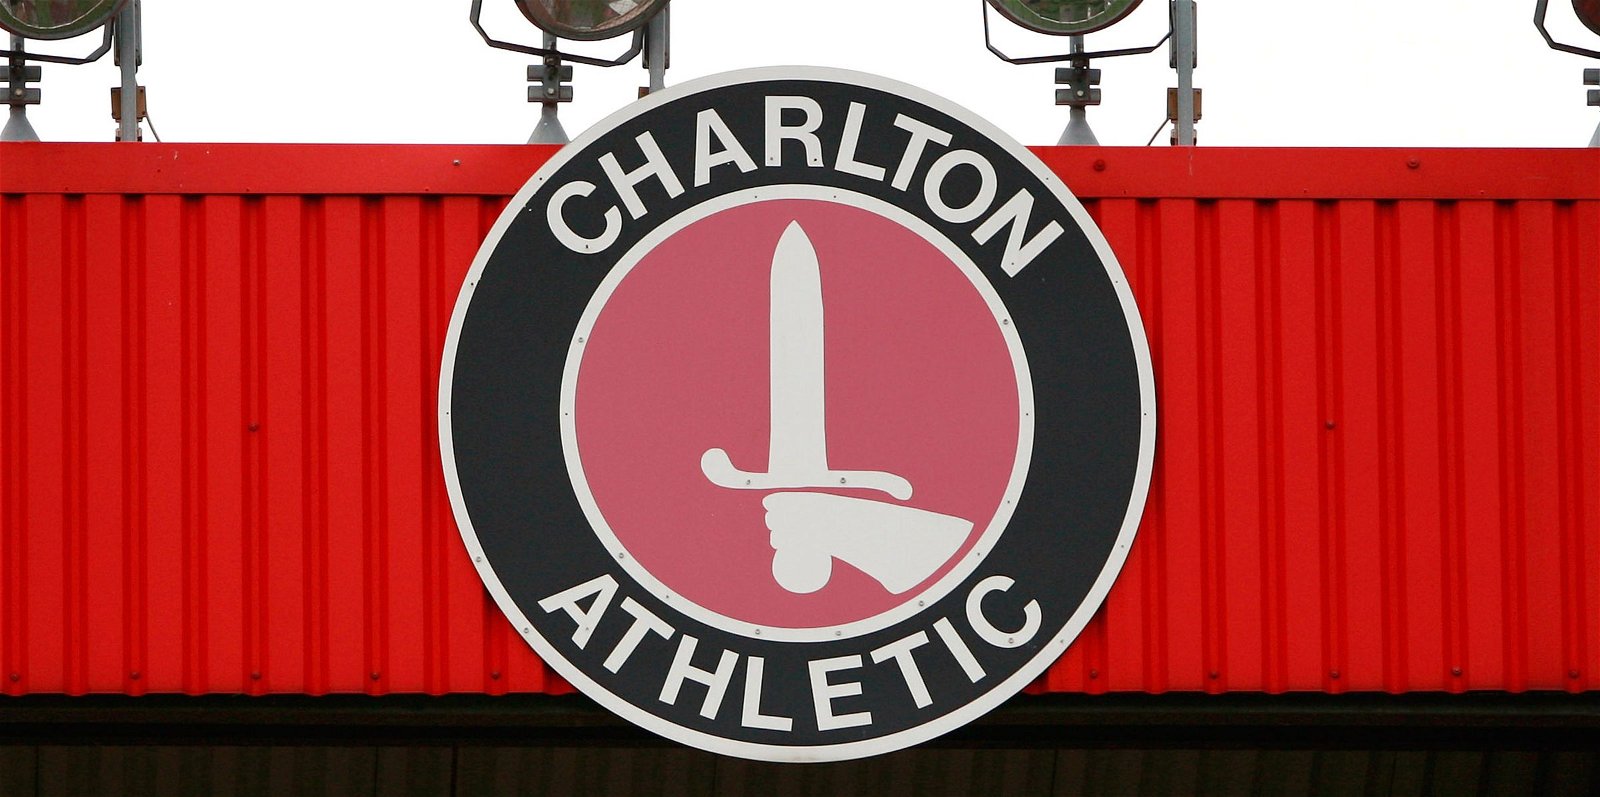 , OPINION: Charlton Athletic doomed if Bassini takeover goes through